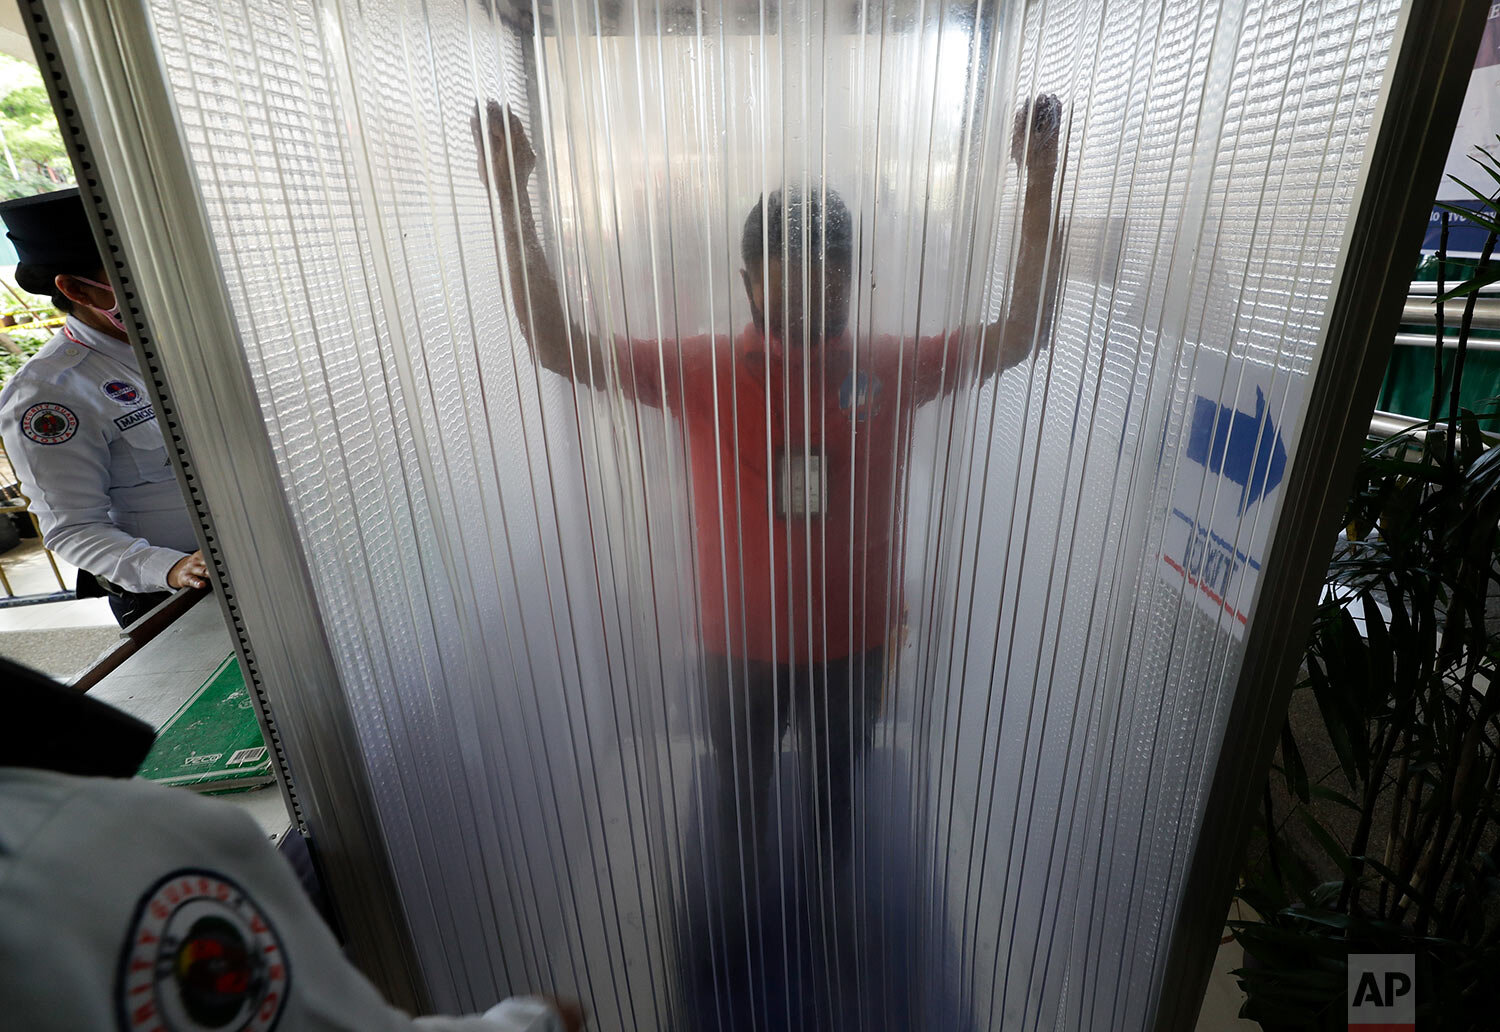  A man is disinfected inside a cubicle before entering local the city hall to prevent the spread of the new coronavirus in Manila, Philippines on Tuesday, March 24, 2020. (AP Photo/Aaron Favila) 